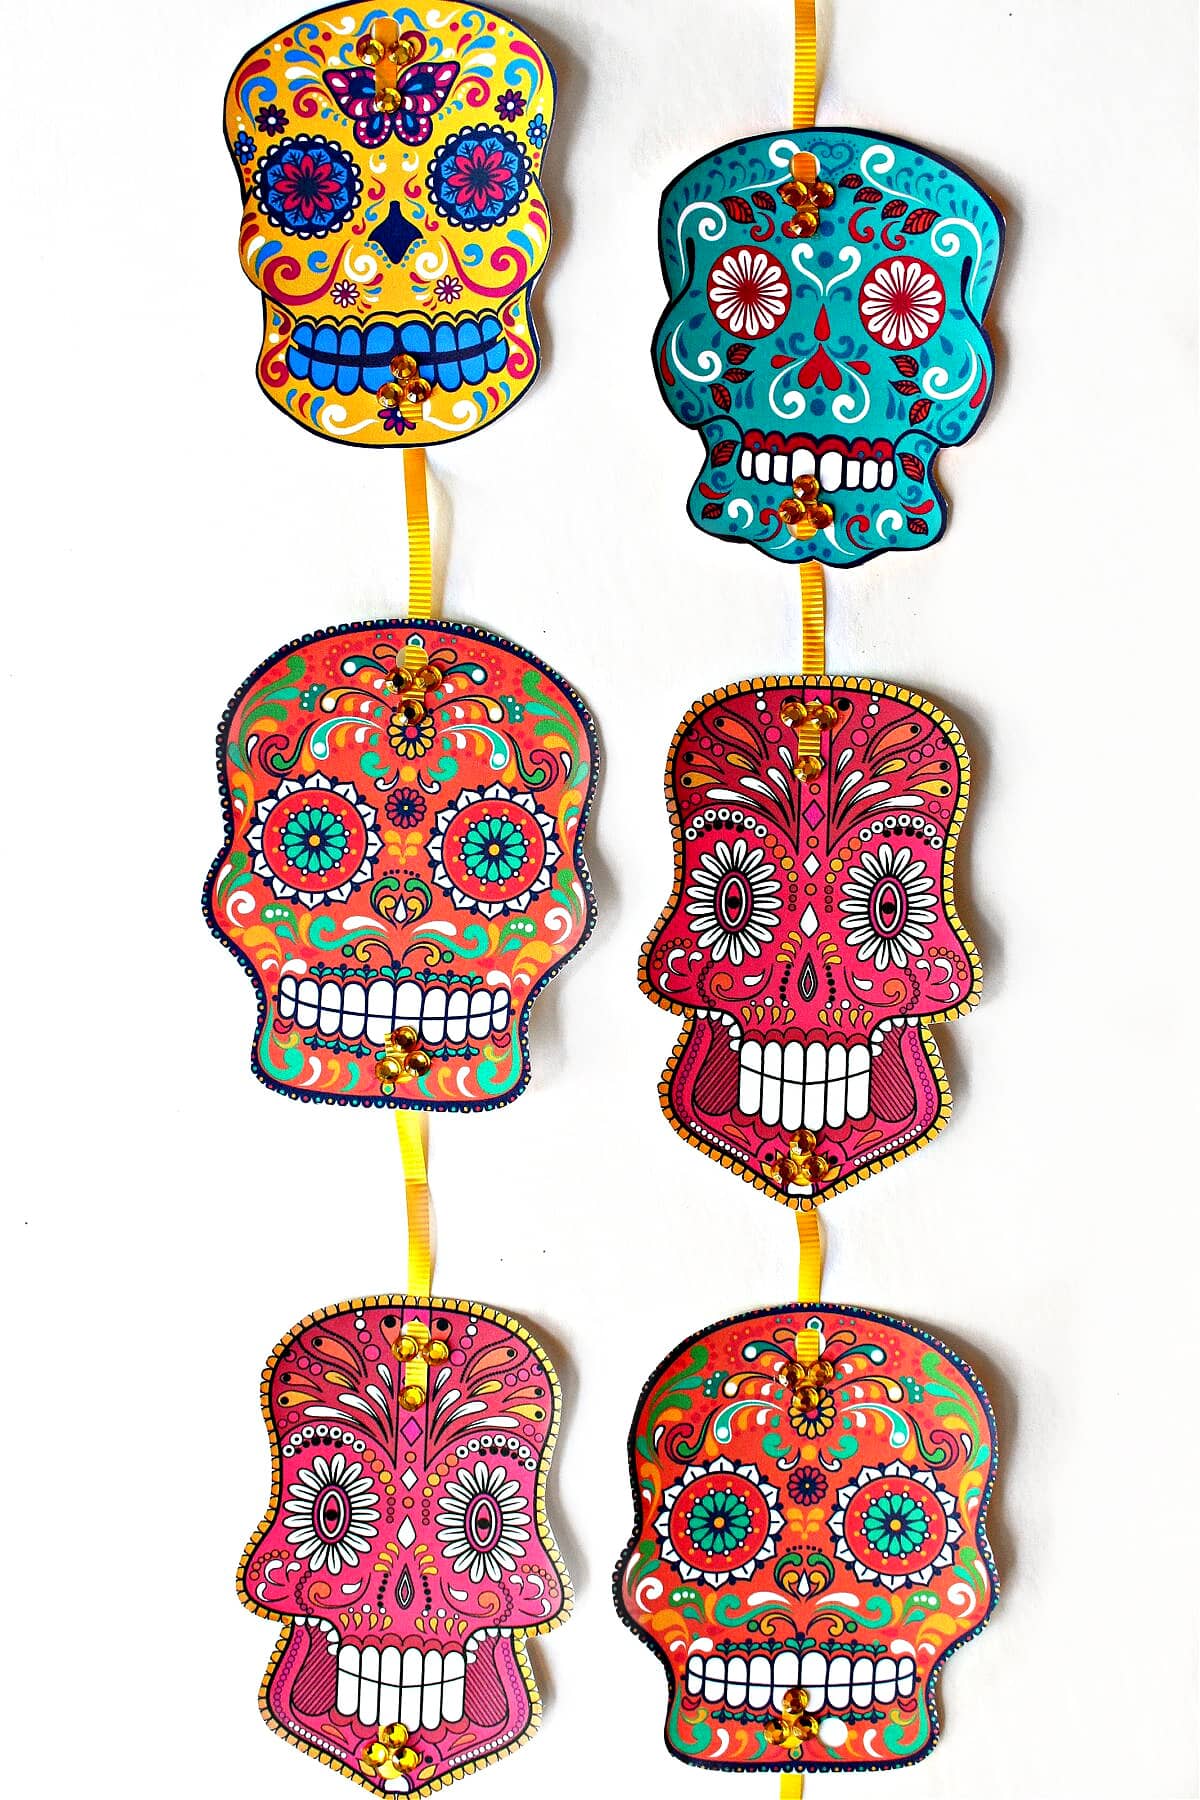 Two strings of colorful calavera skulls printed on cardstock.